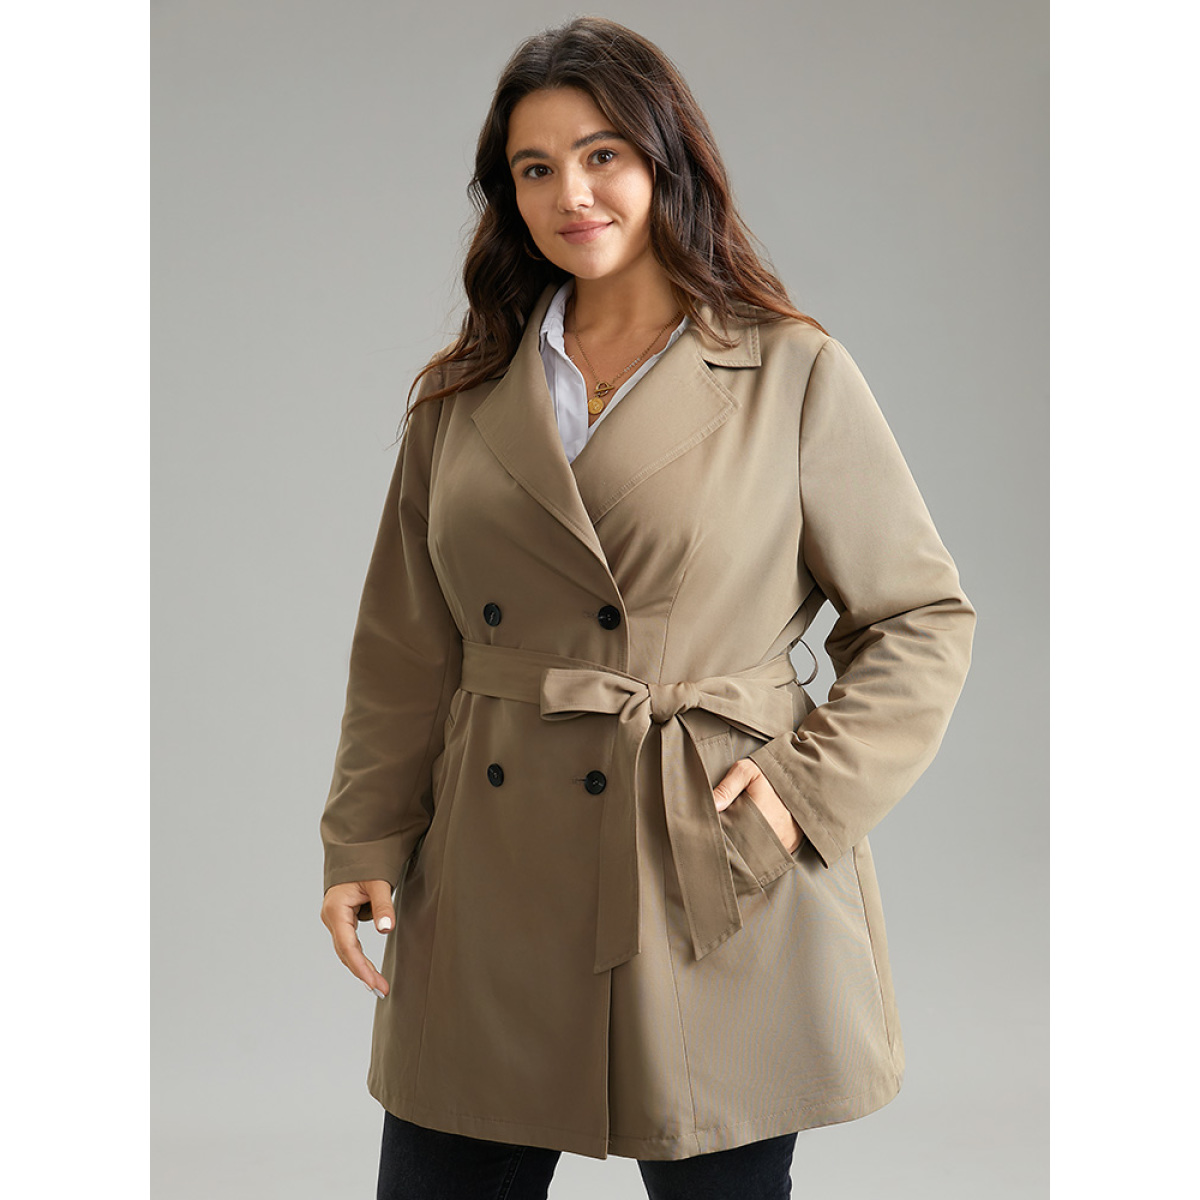 

Plus Size Plain Double Breasted Belted Lapel Collar Coat Women LightBrown Casual Plain Ladies Dailywear Winter Coats BloomChic